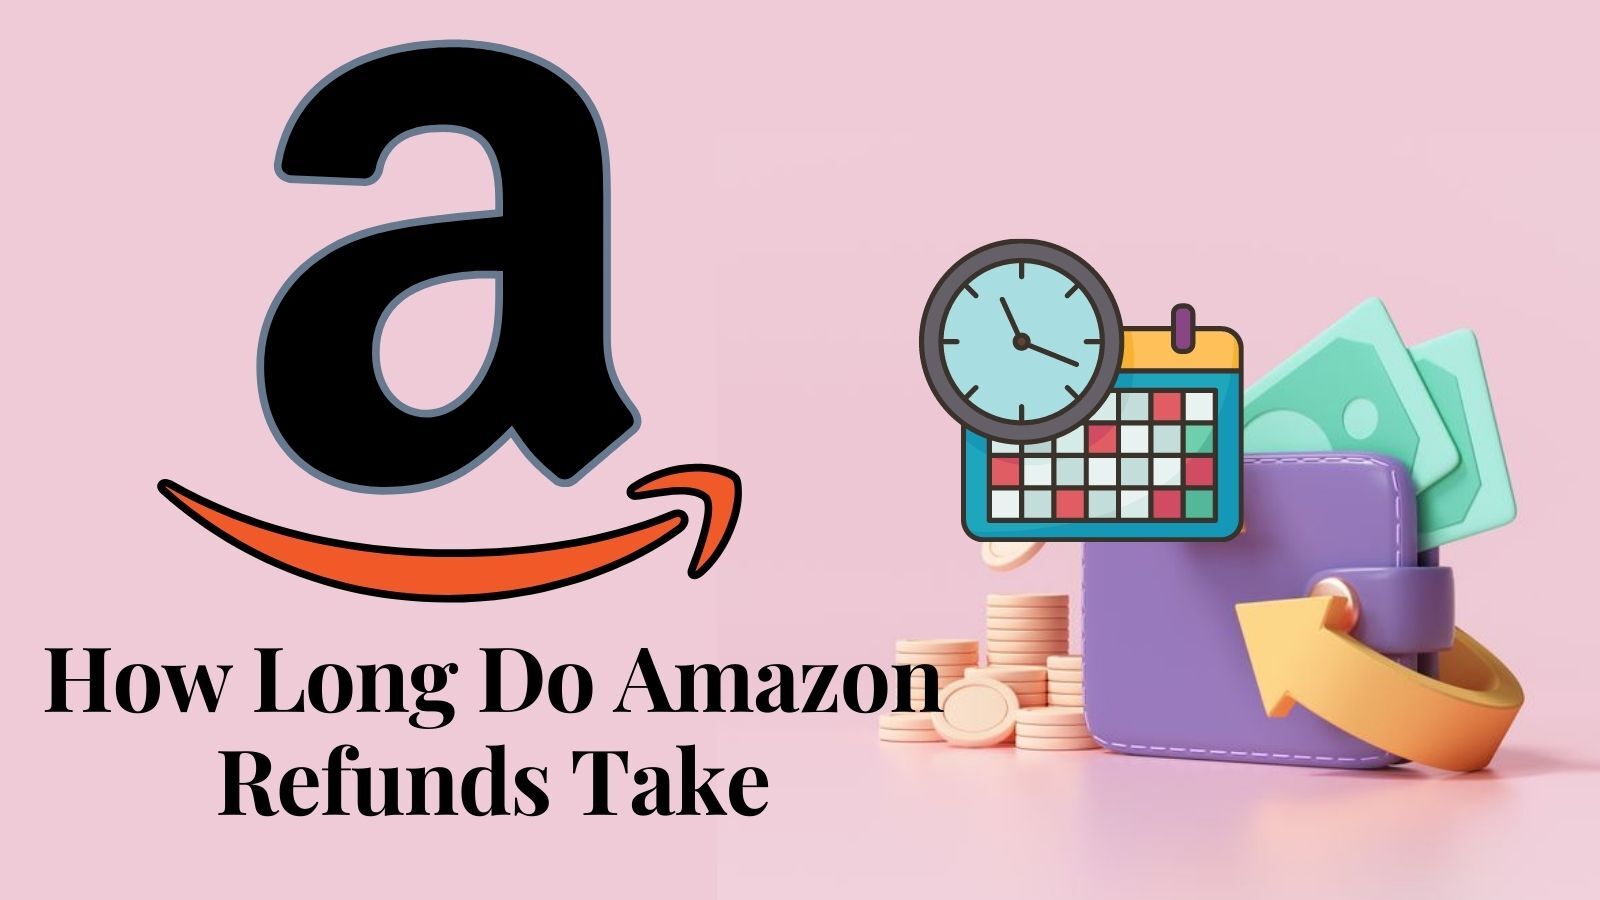 How Long Do Amazon Refunds Take? (Included Ordinary, Prime, and Third-Party Sellers)